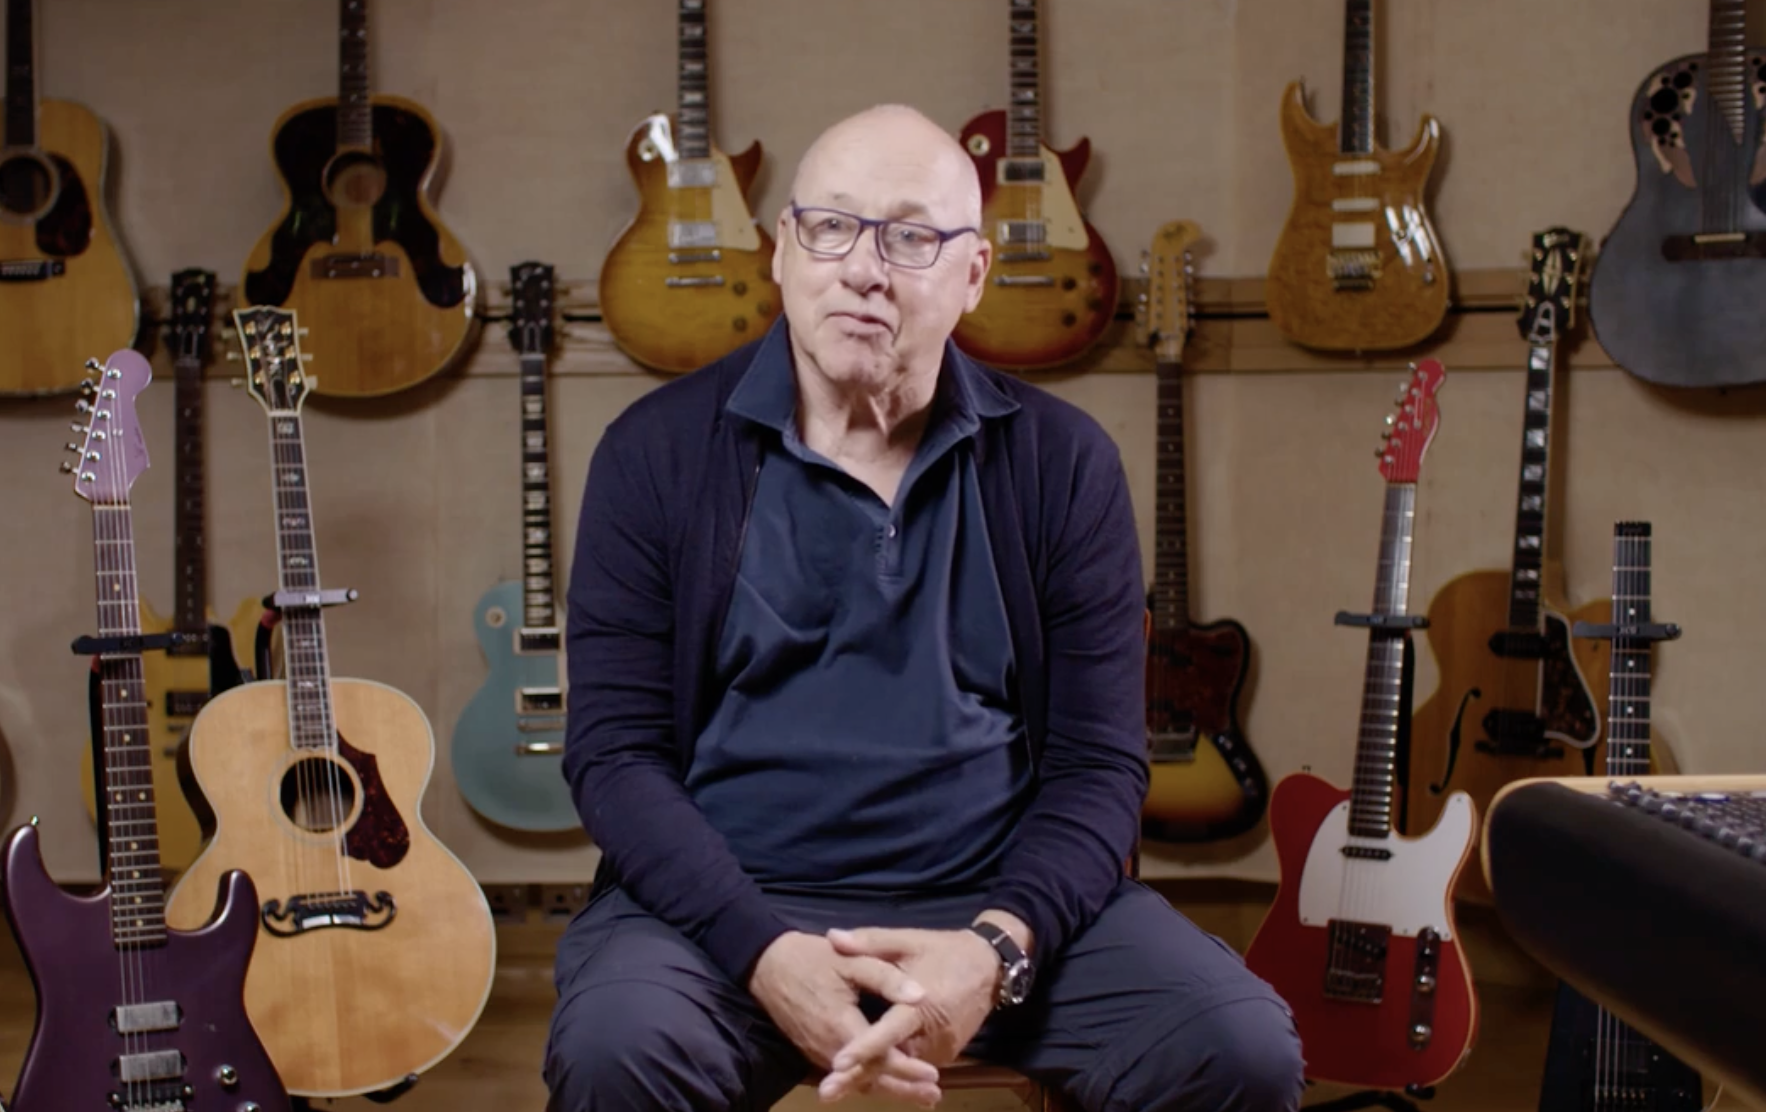 Mark Knopfler is putting some of his guitars up for auction /Christies.com